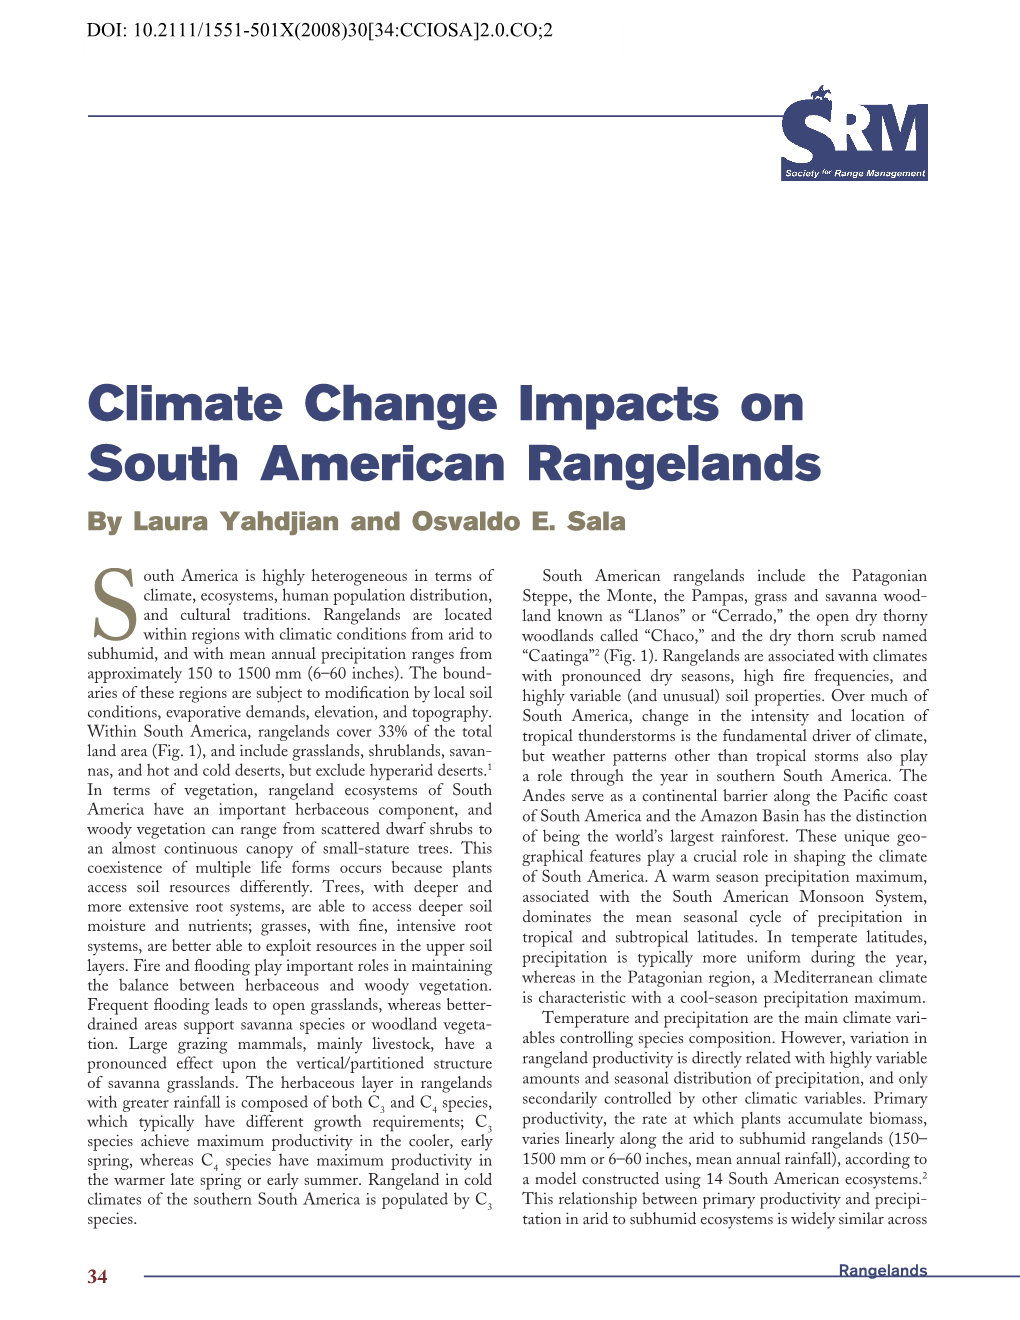 Climate Change Impacts on South American Rangelands by Laura Yahdjian and Osvaldo E